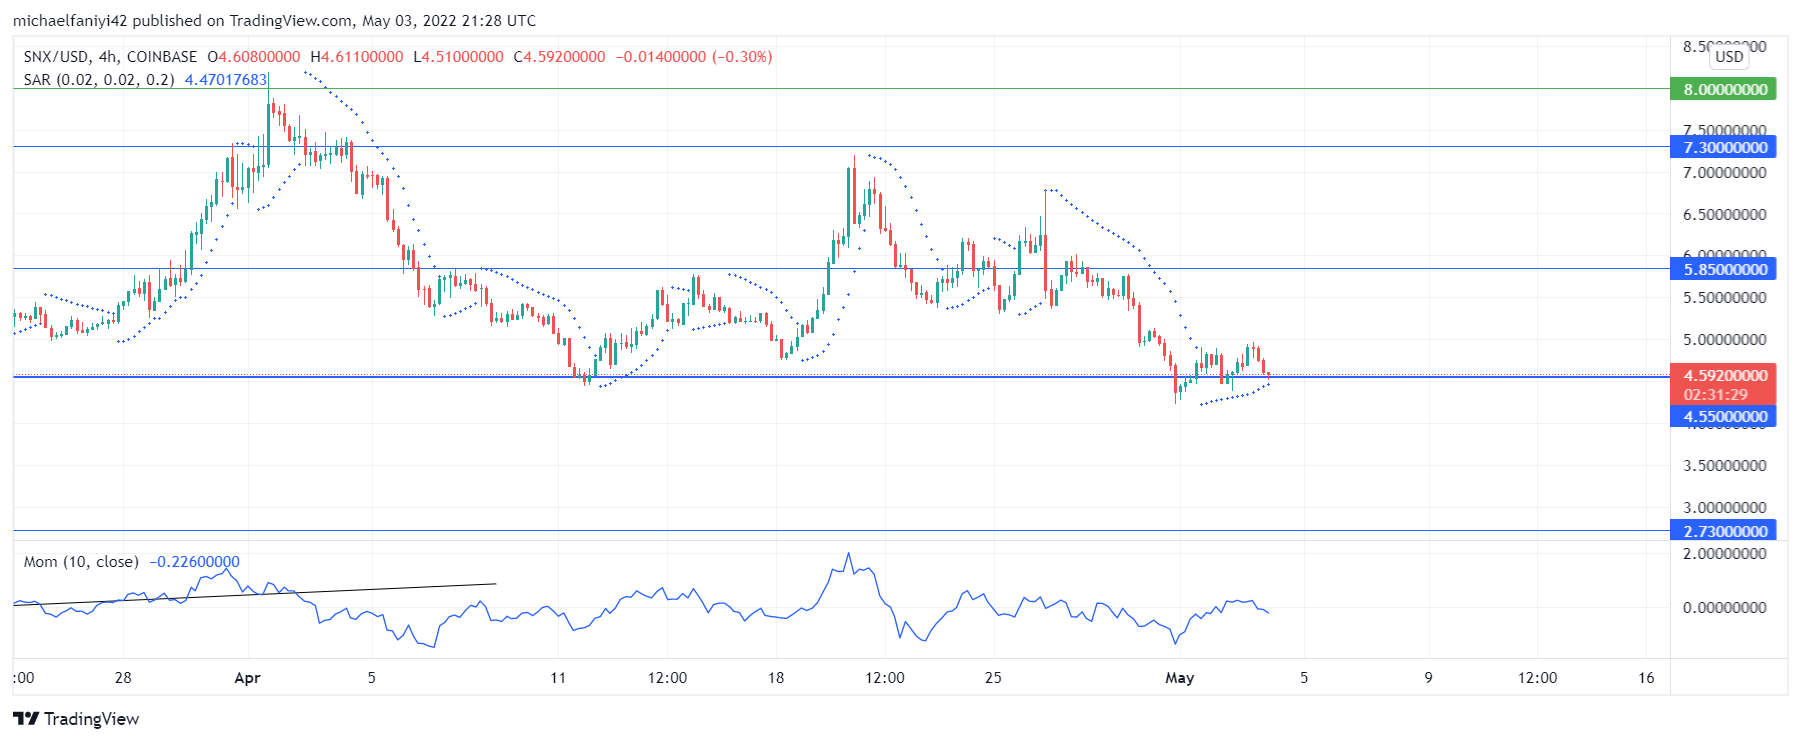 Synthetix (SNXUSD) Is Struggling to Maintain a Hold Above $4.550